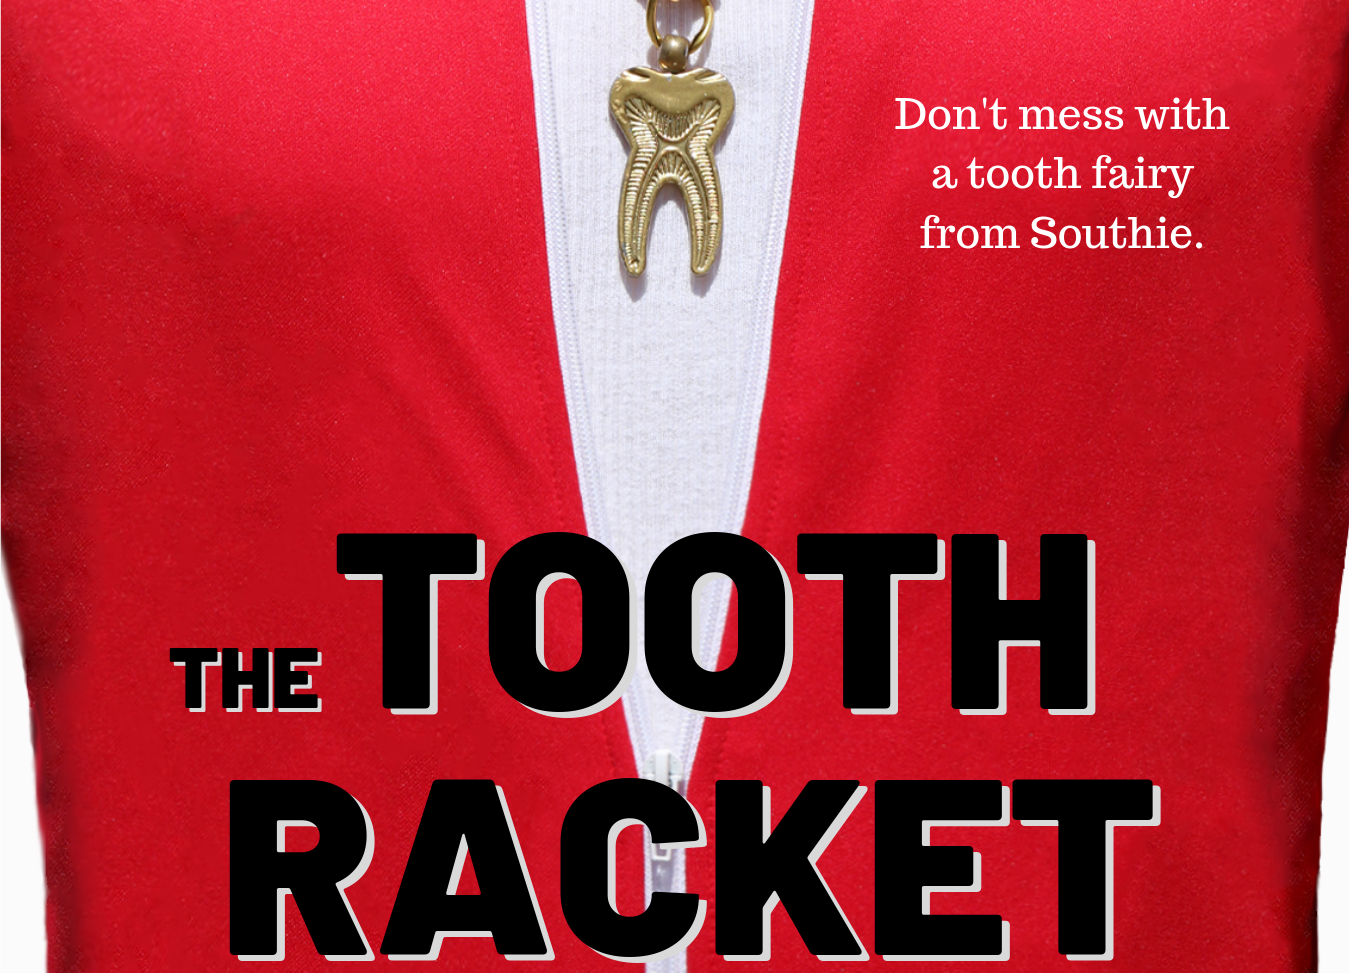 The Tooth Racket